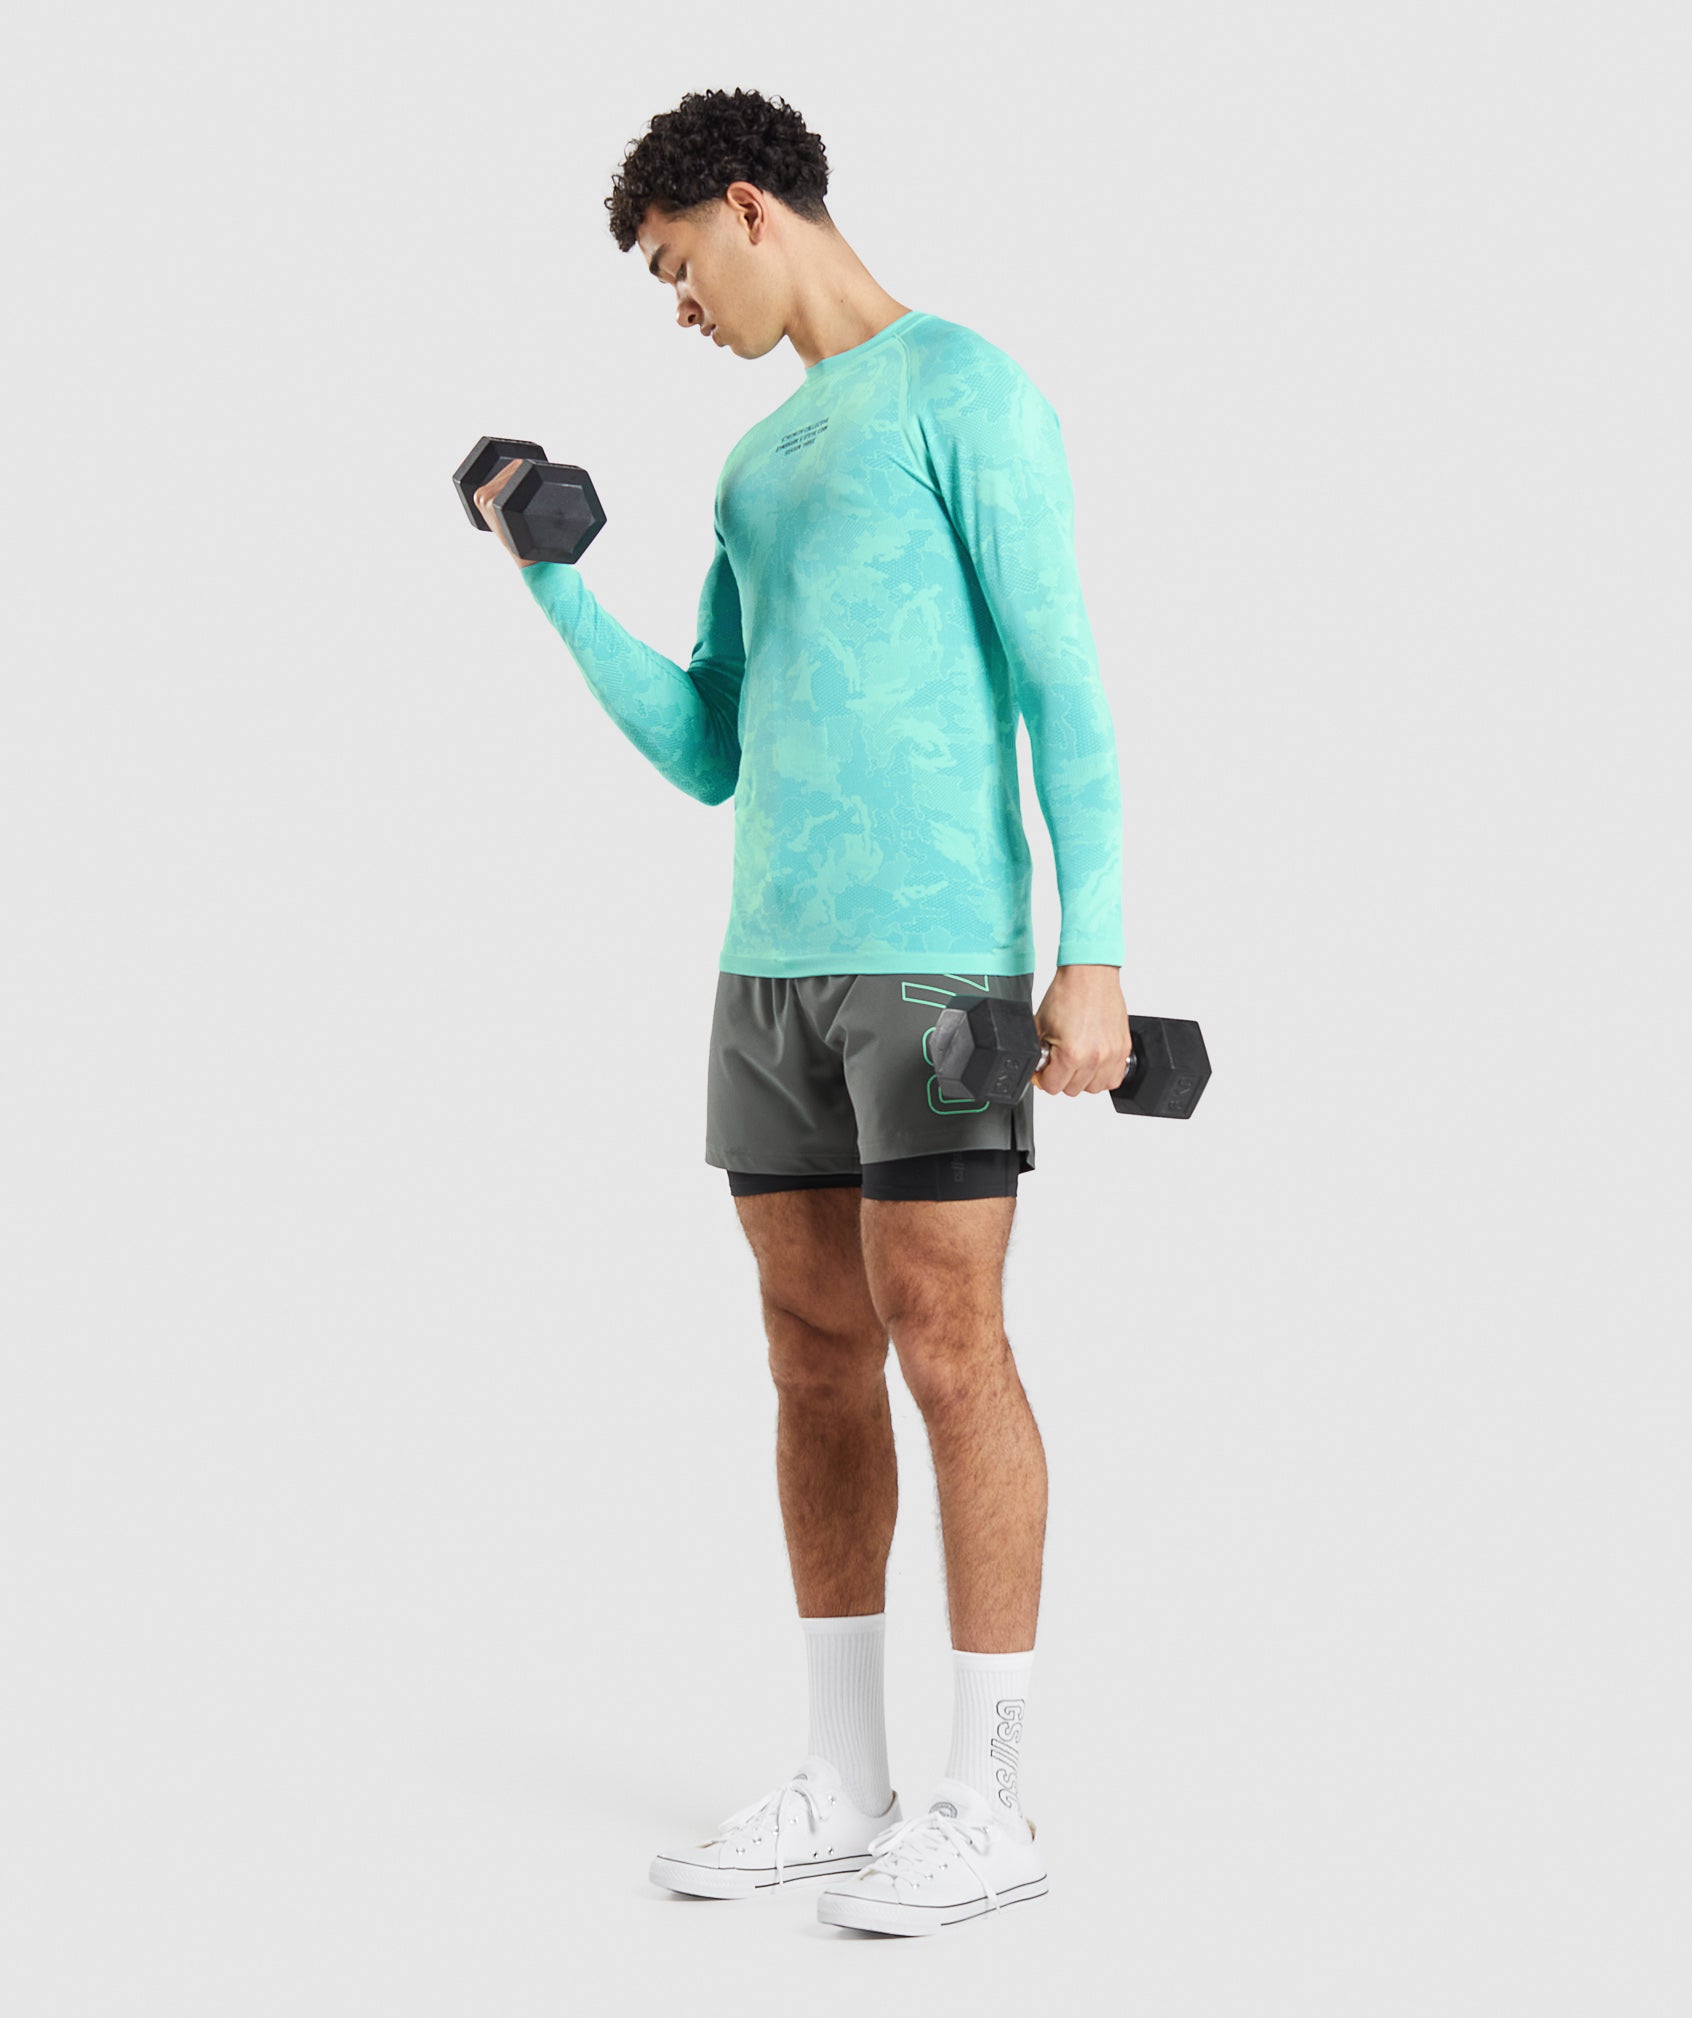 Gymshark//Steve Cook Long Sleeve Seamless T-Shirt in Bright Turquoise/Atlas Blue - view 3